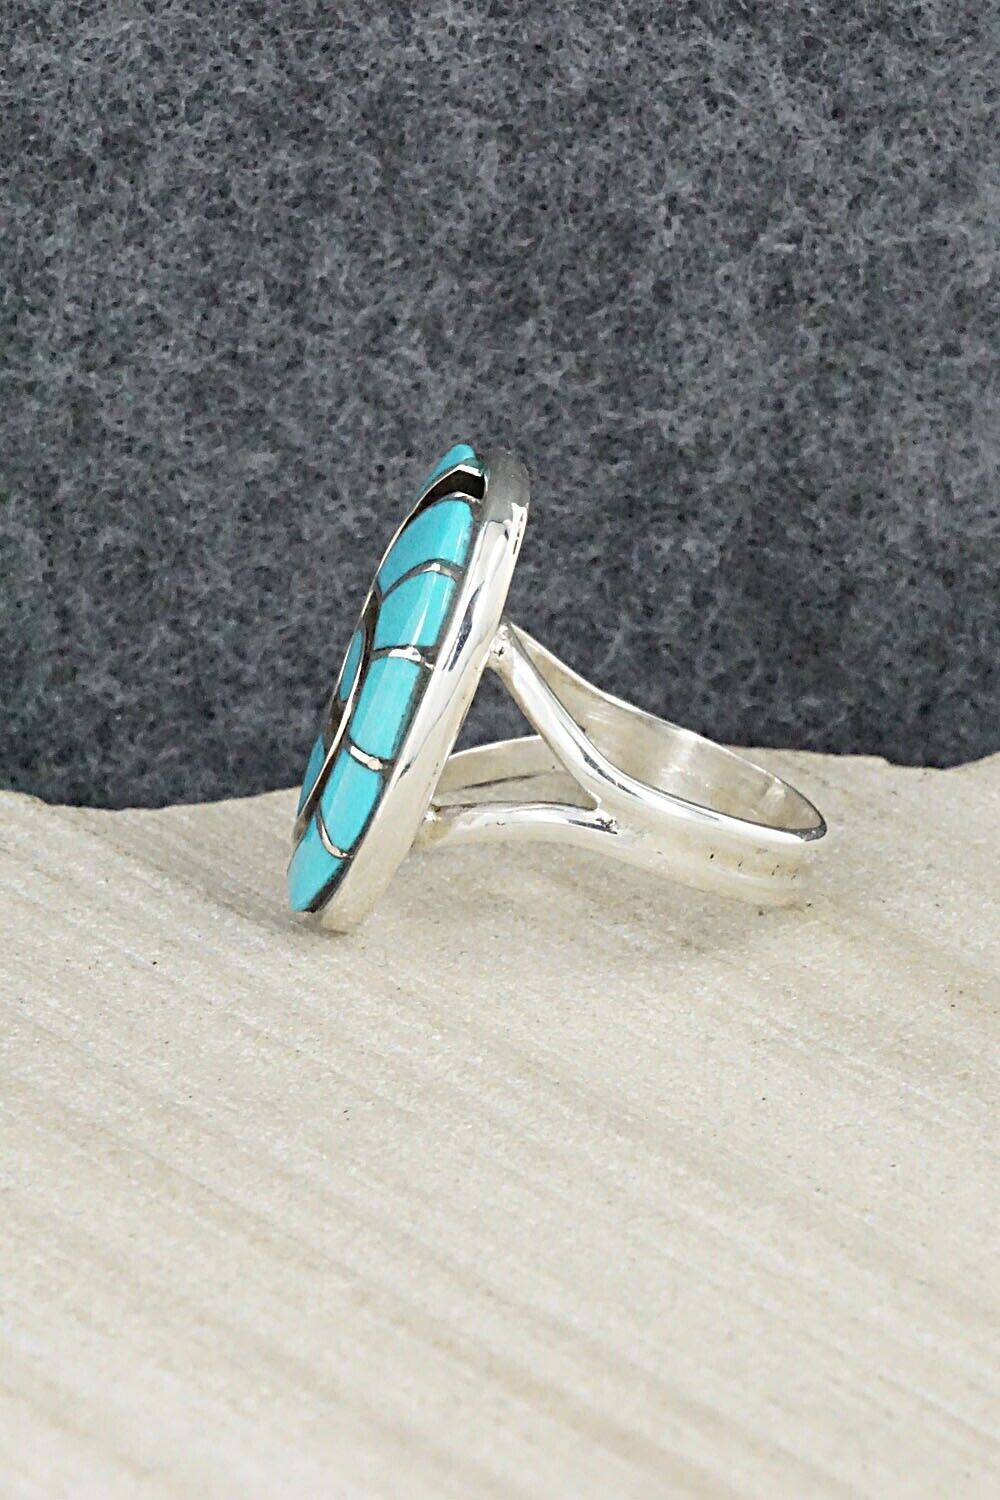 Turquoise & Sterling Silver Bracelet and Ring Set - Amy Wesley